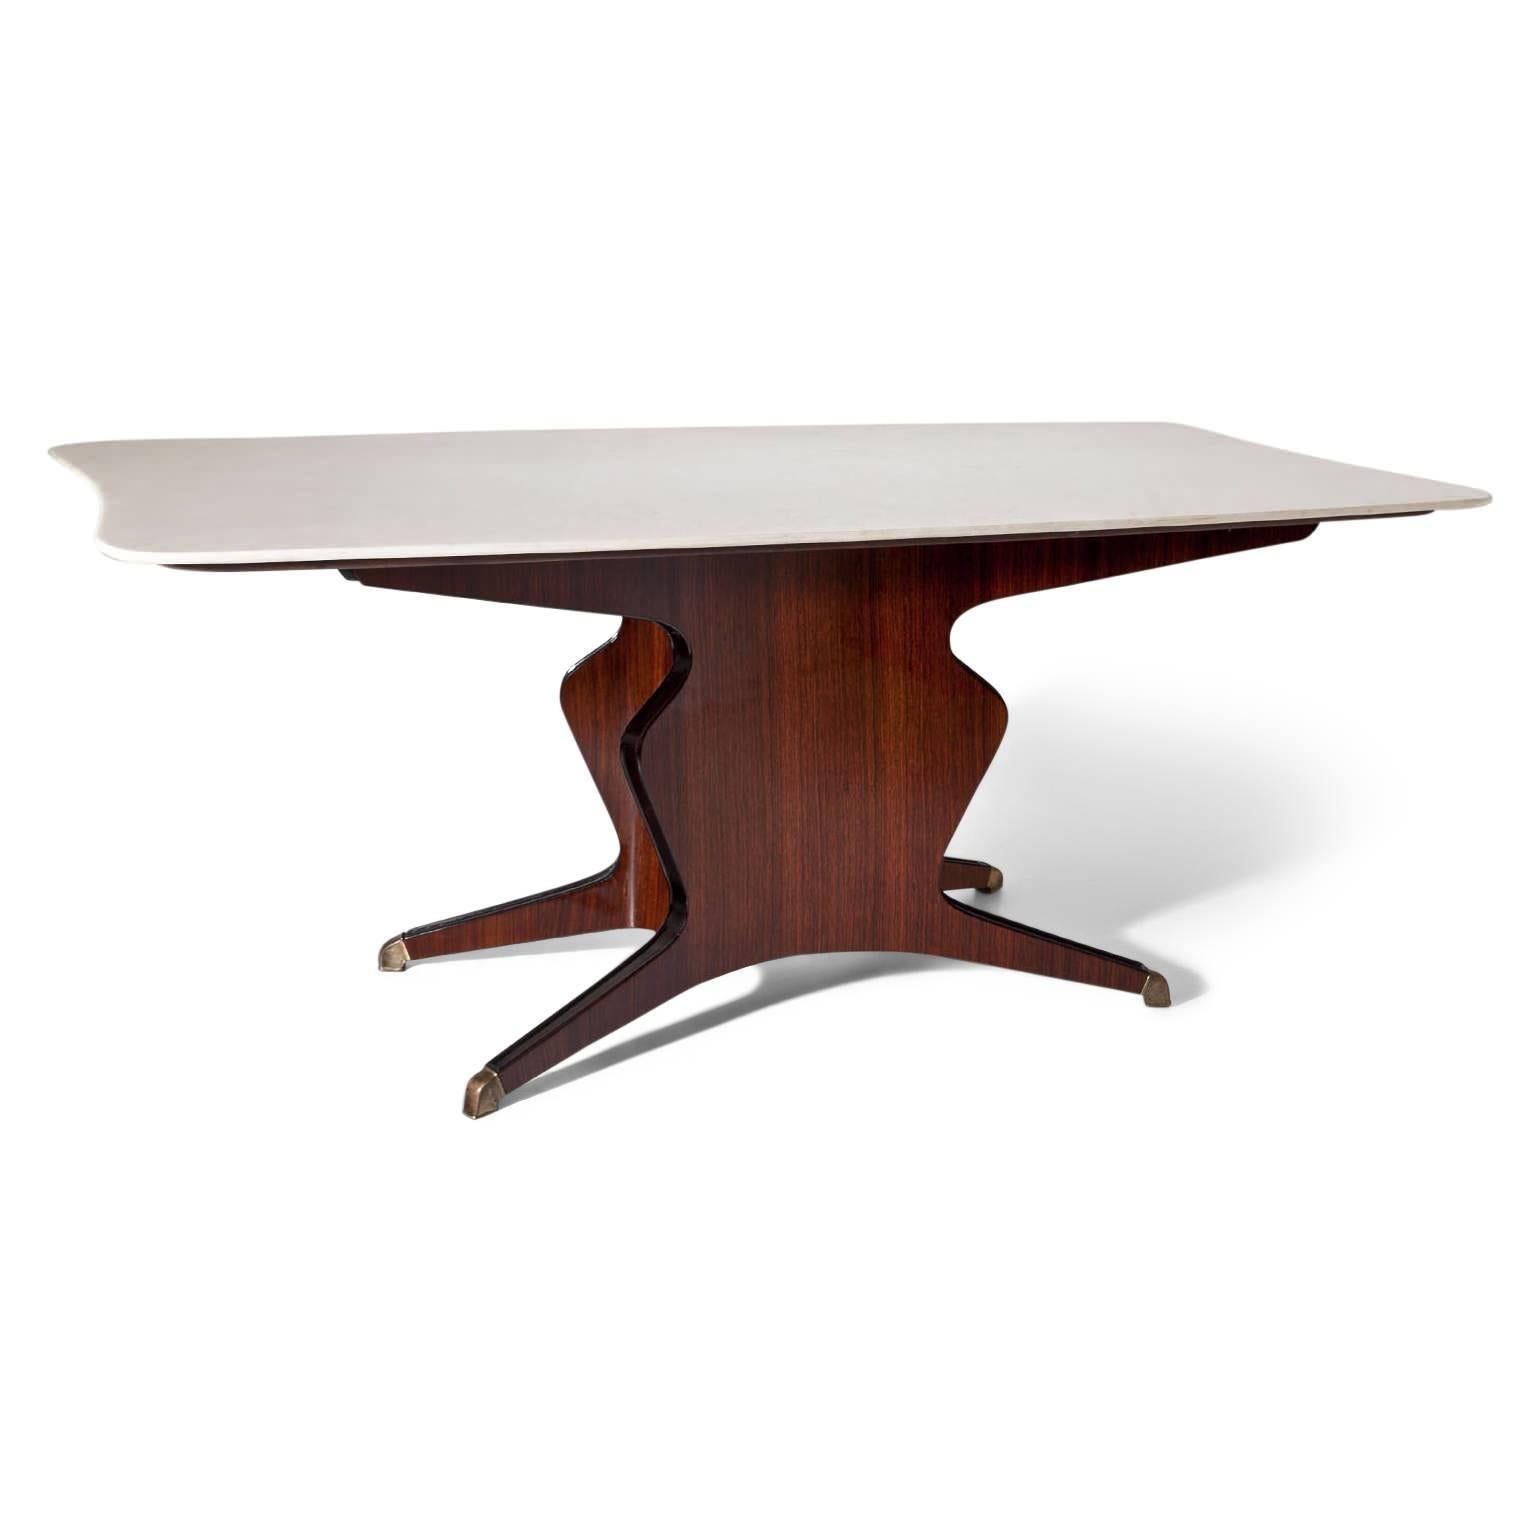 Large dining room table with white onyx top on a scalloped base with four feet. The tabletop is convex and concave curved and labelled at the bottom “Mobilifico Fratelli Turri - Carugo”. The table is in a very good, refurbished and hand-polished